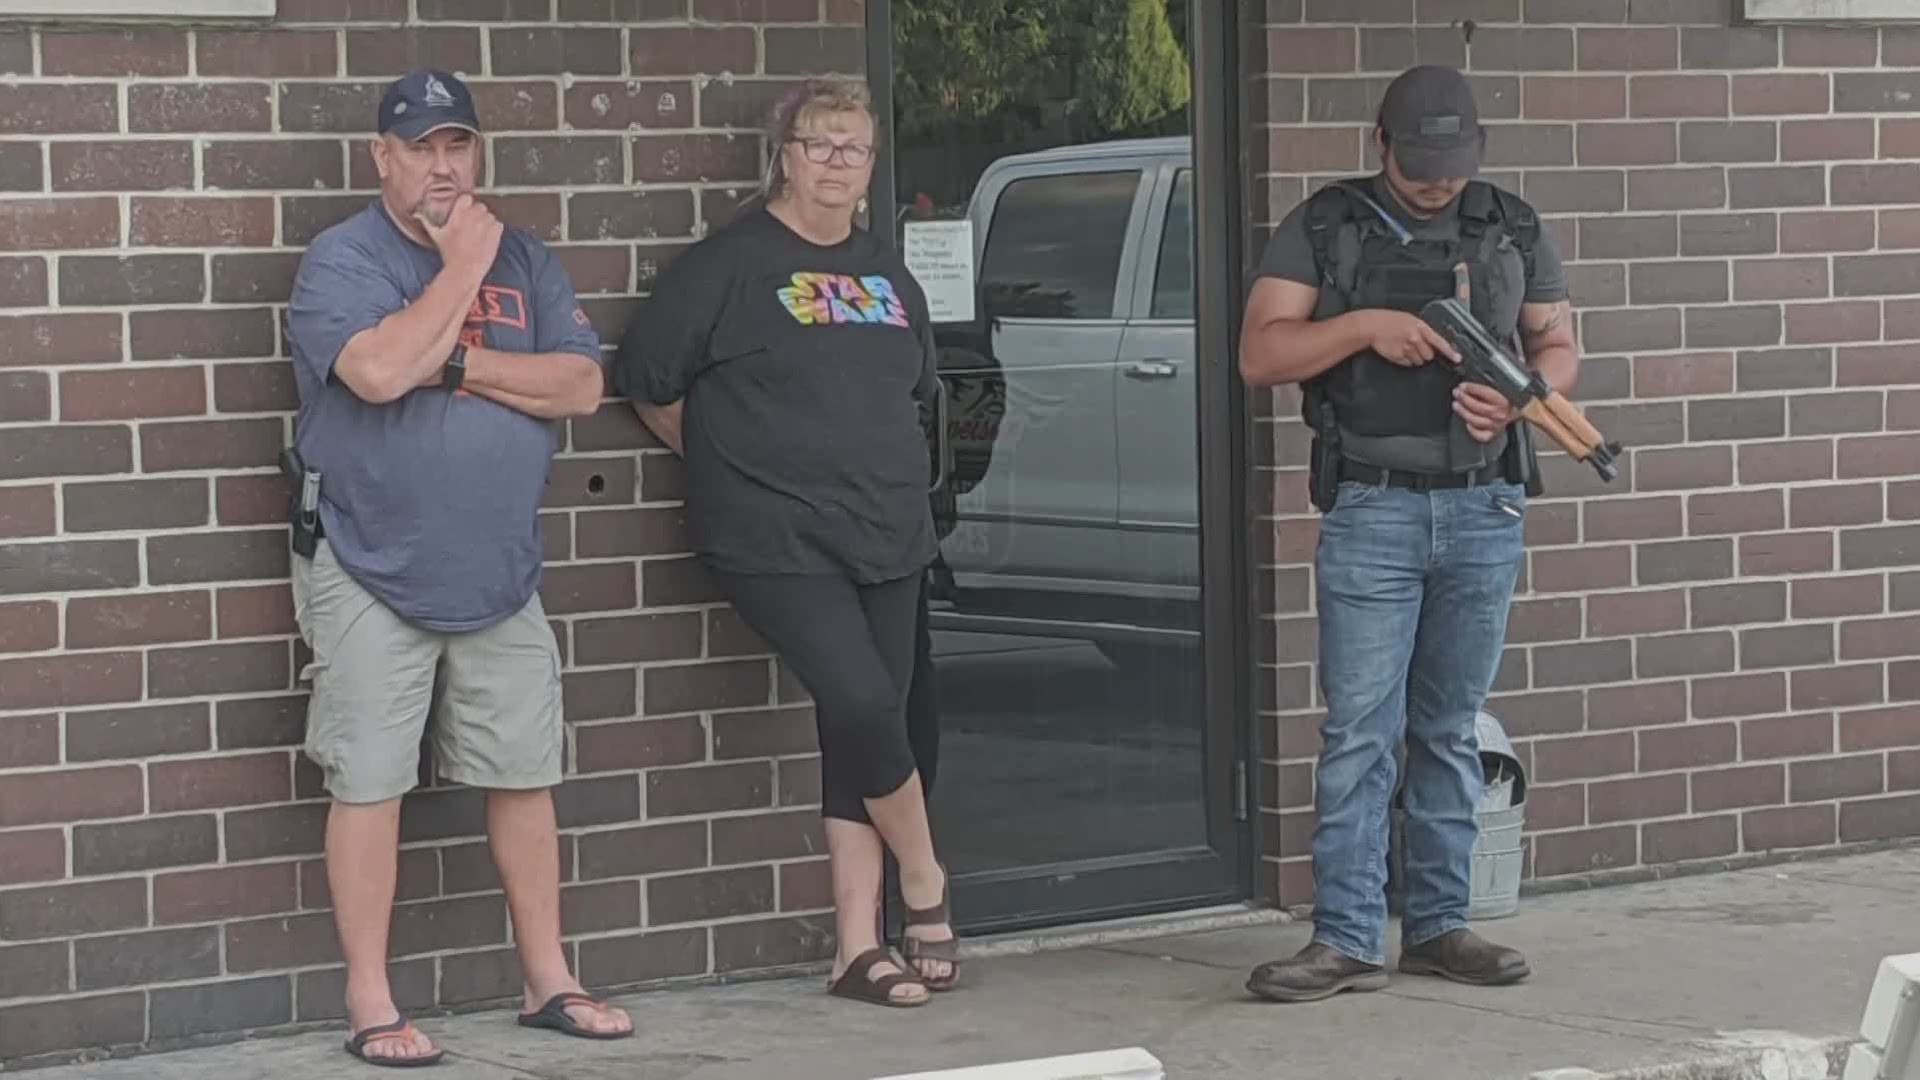 Bar owners explain why they stood armed outside their business amid protests